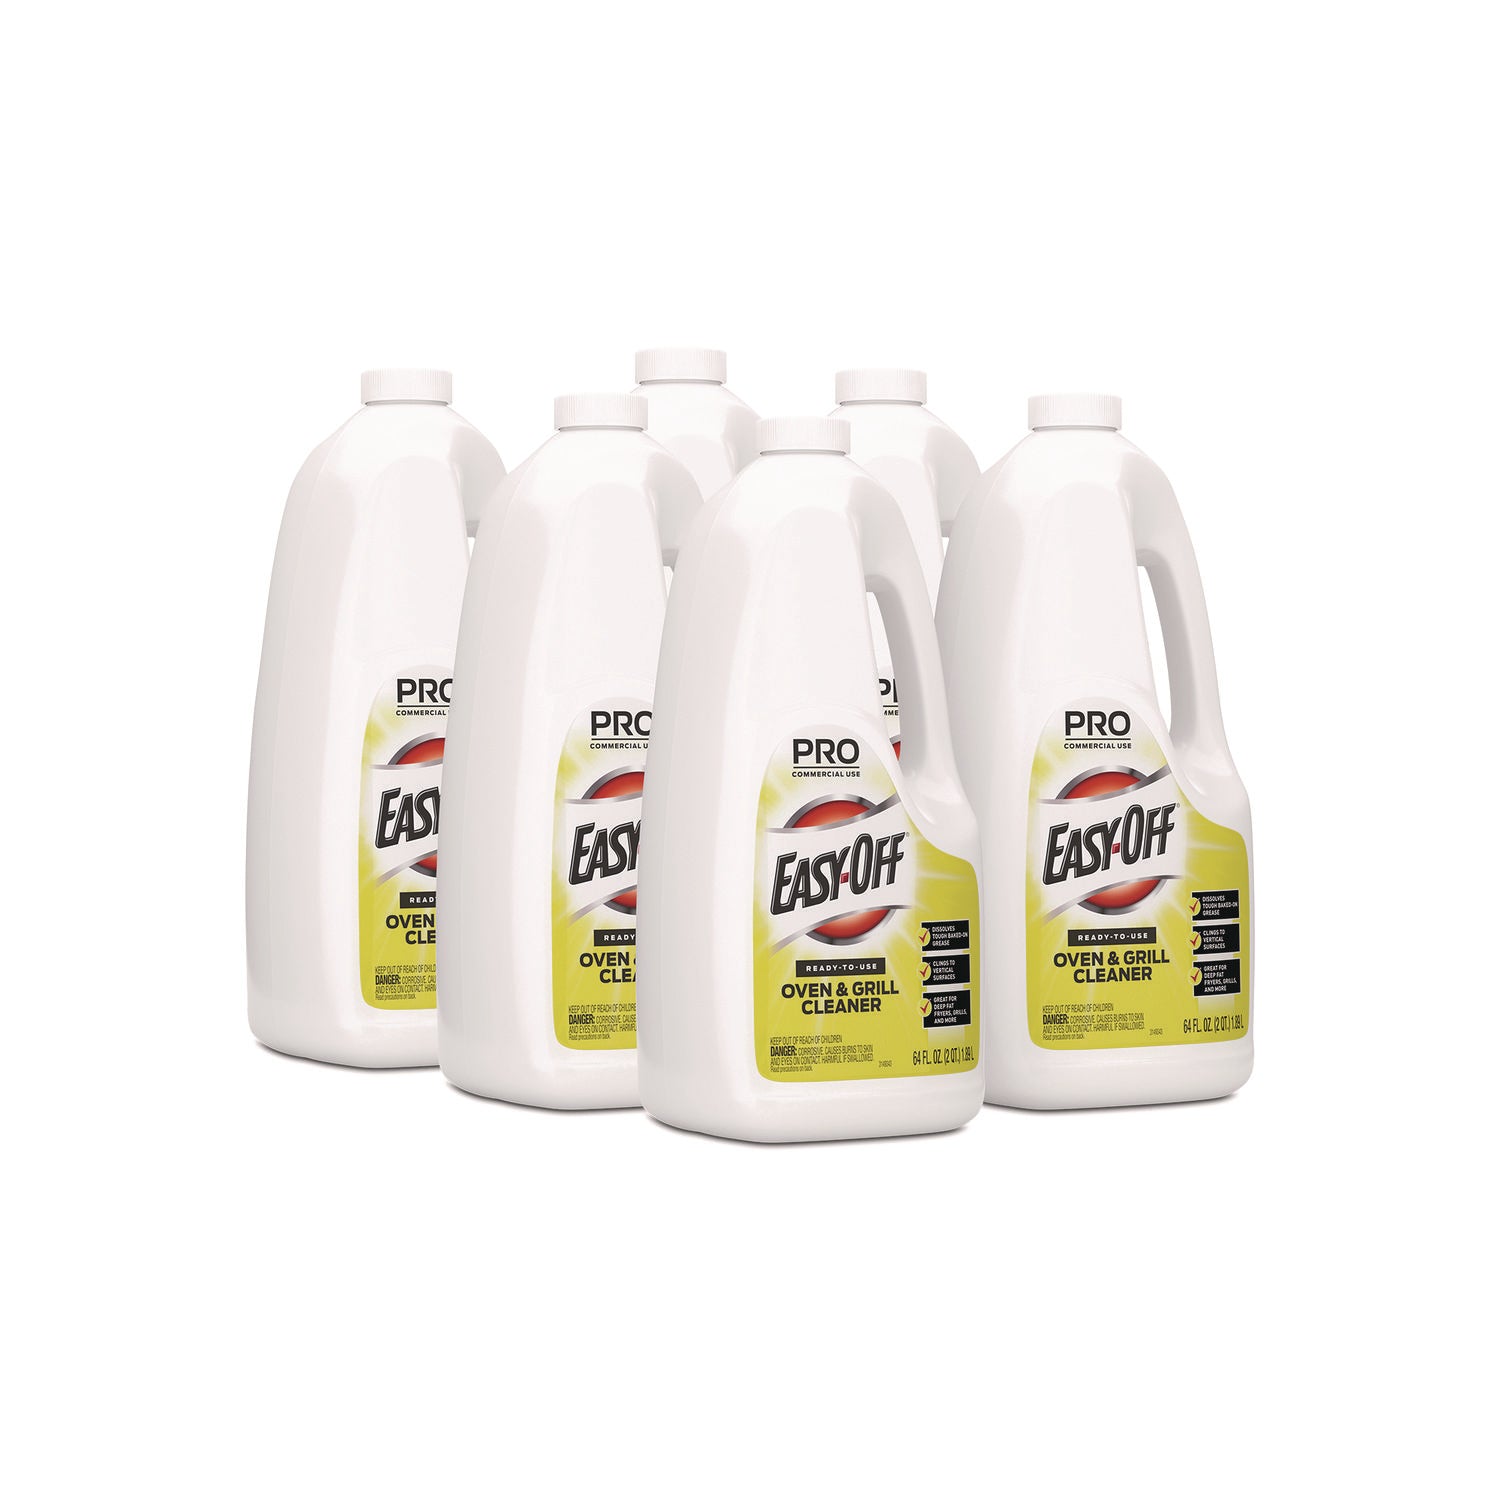 ready-to-use-oven-and-grill-cleaner-liquid-2-qt-bottle-6-carton_rac80689ct - 1